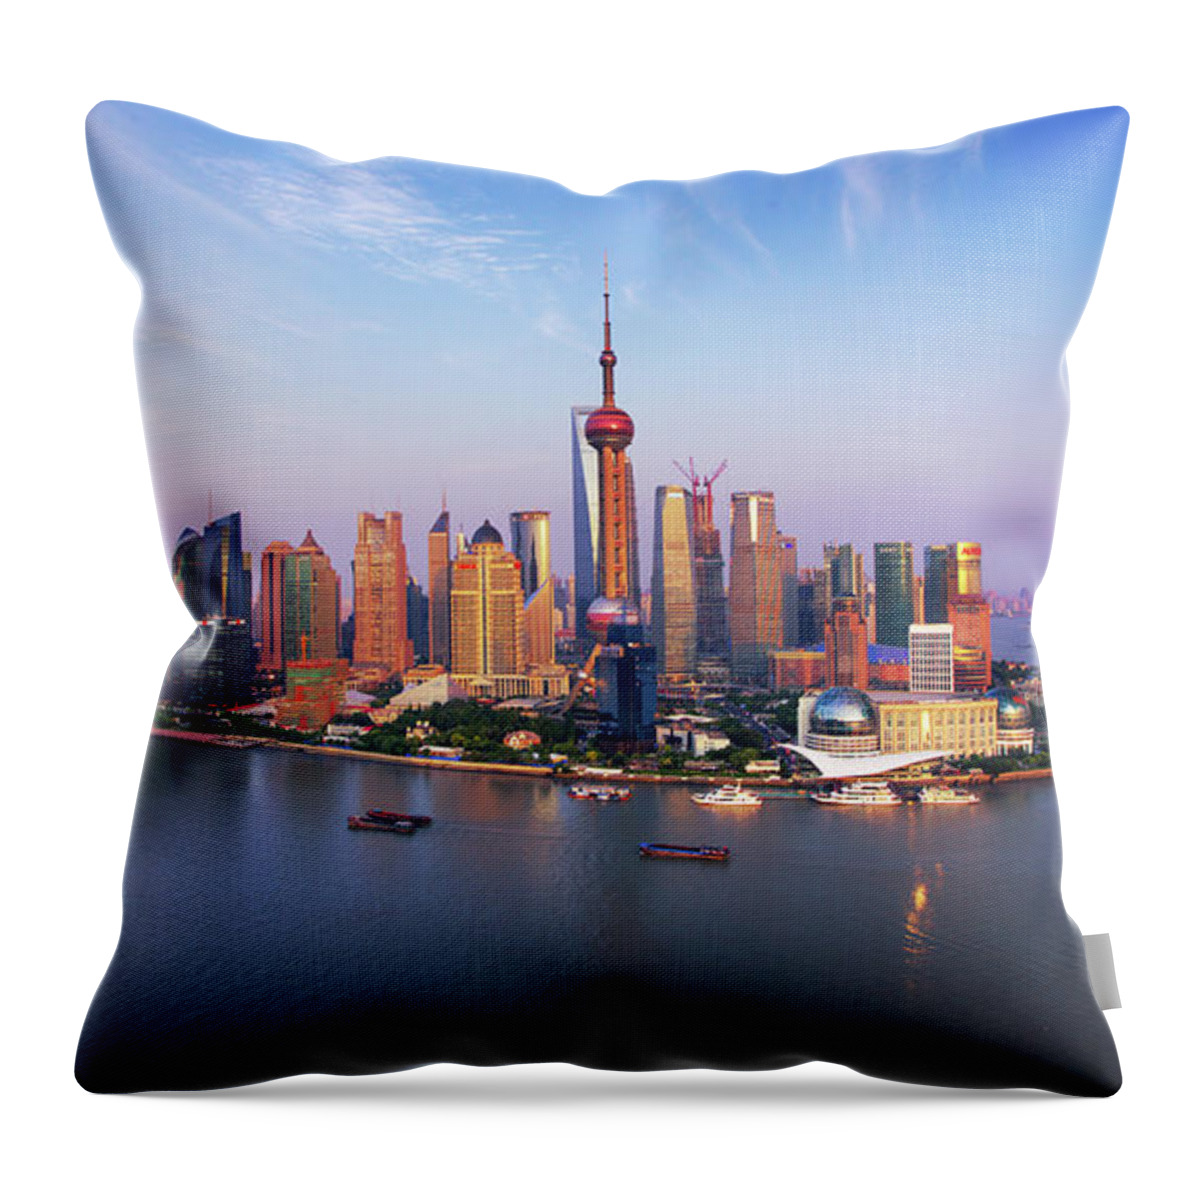 Built Structure Throw Pillow featuring the photograph Shanghai Skyline by Blackstation